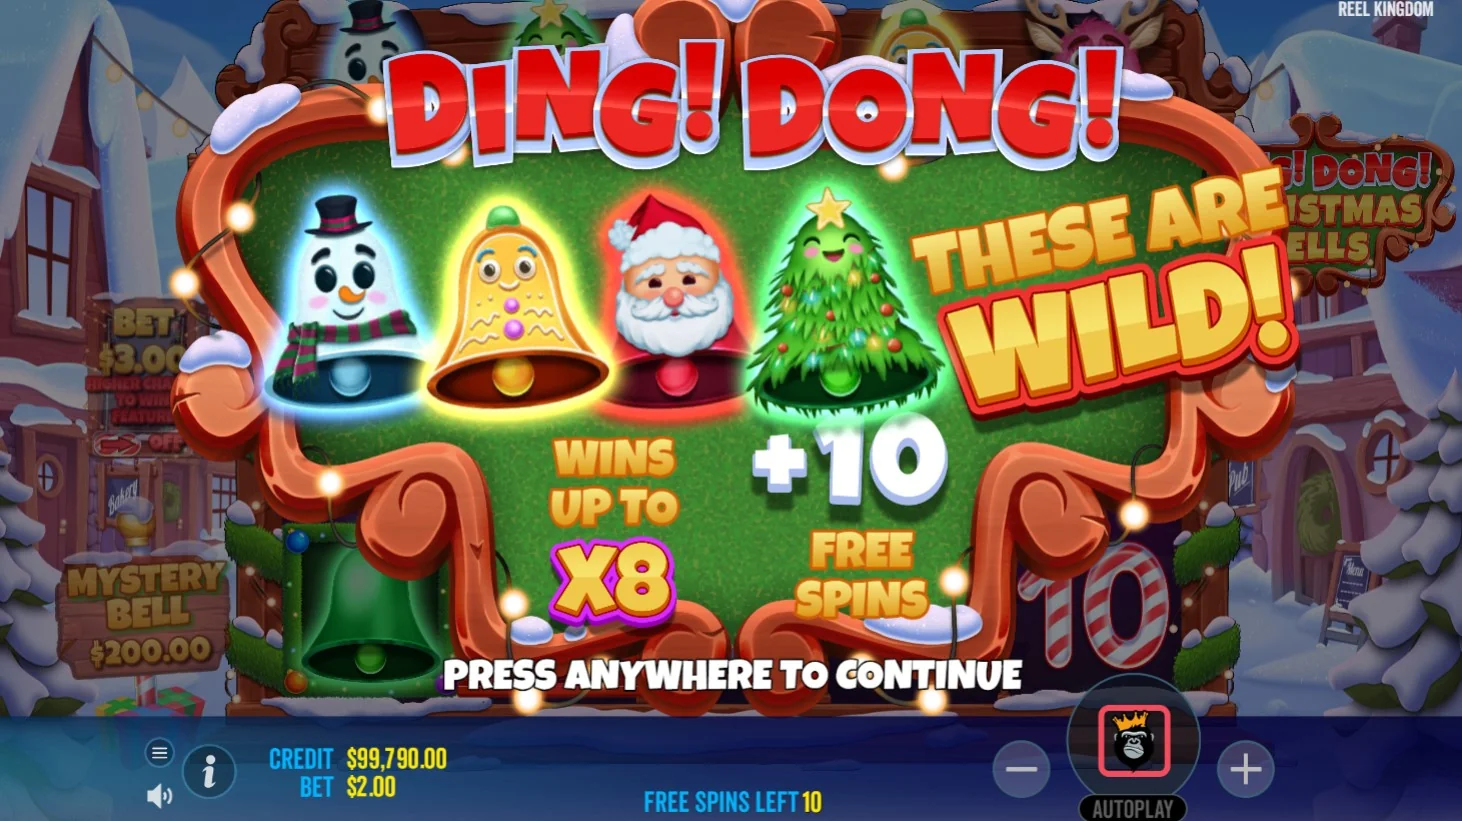 ding dong christmas bells slot mystery bell